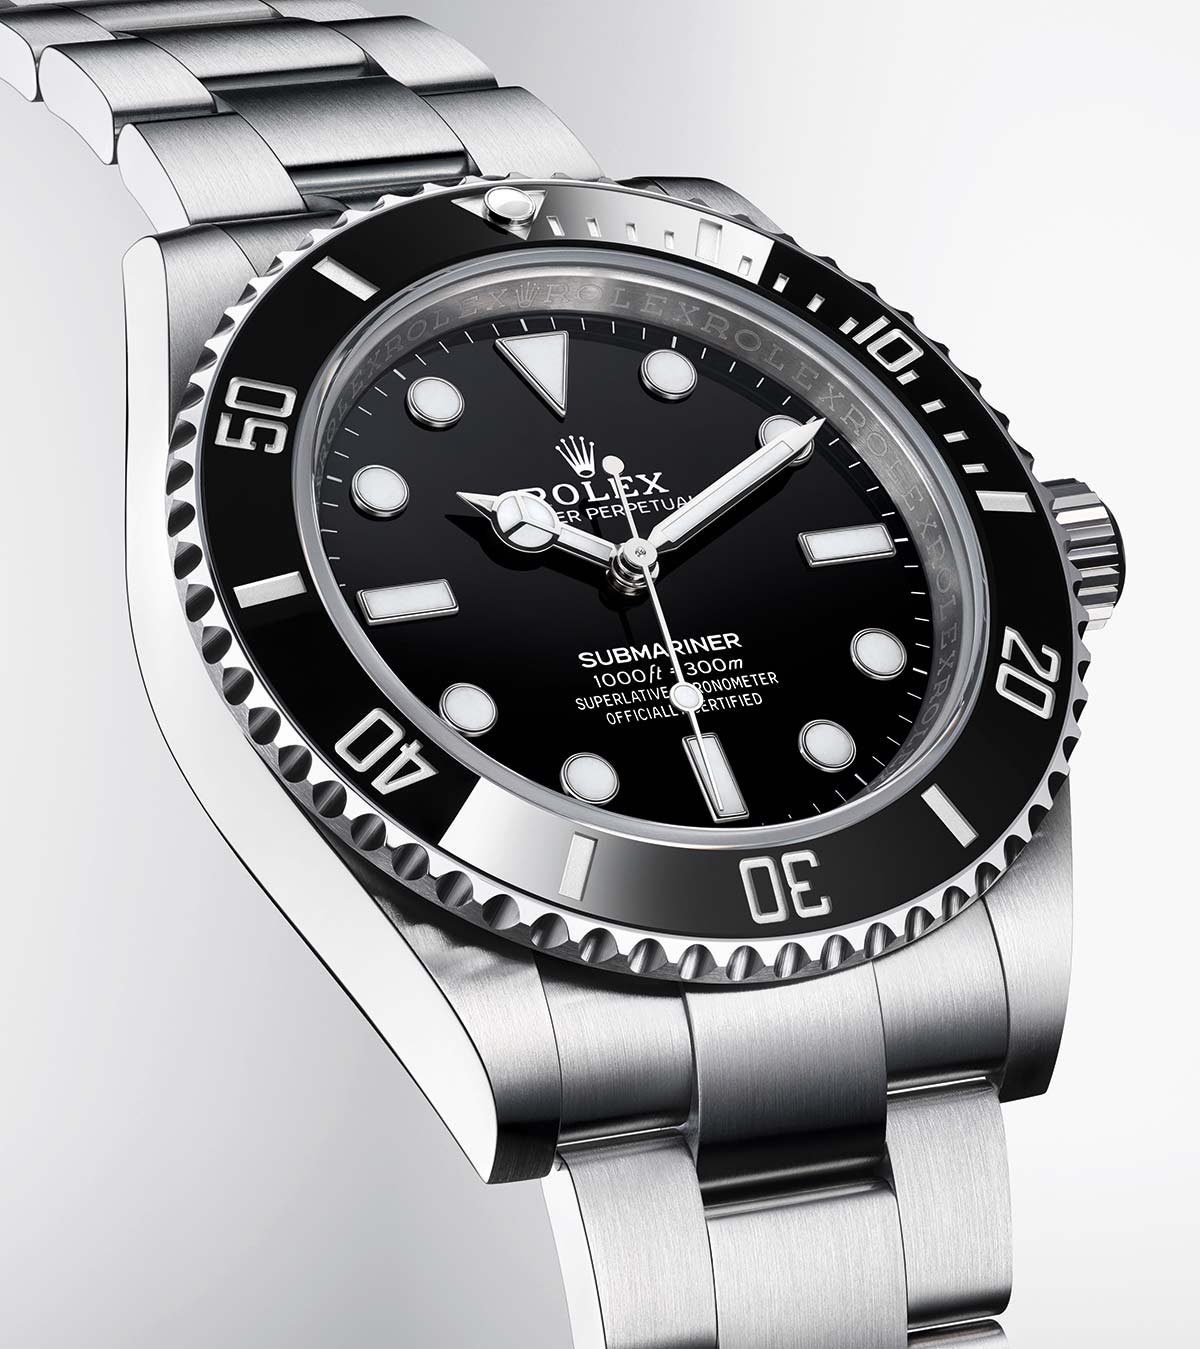 Rolex Submariner ln And lv The New Models Time And Watches The Watch Blog